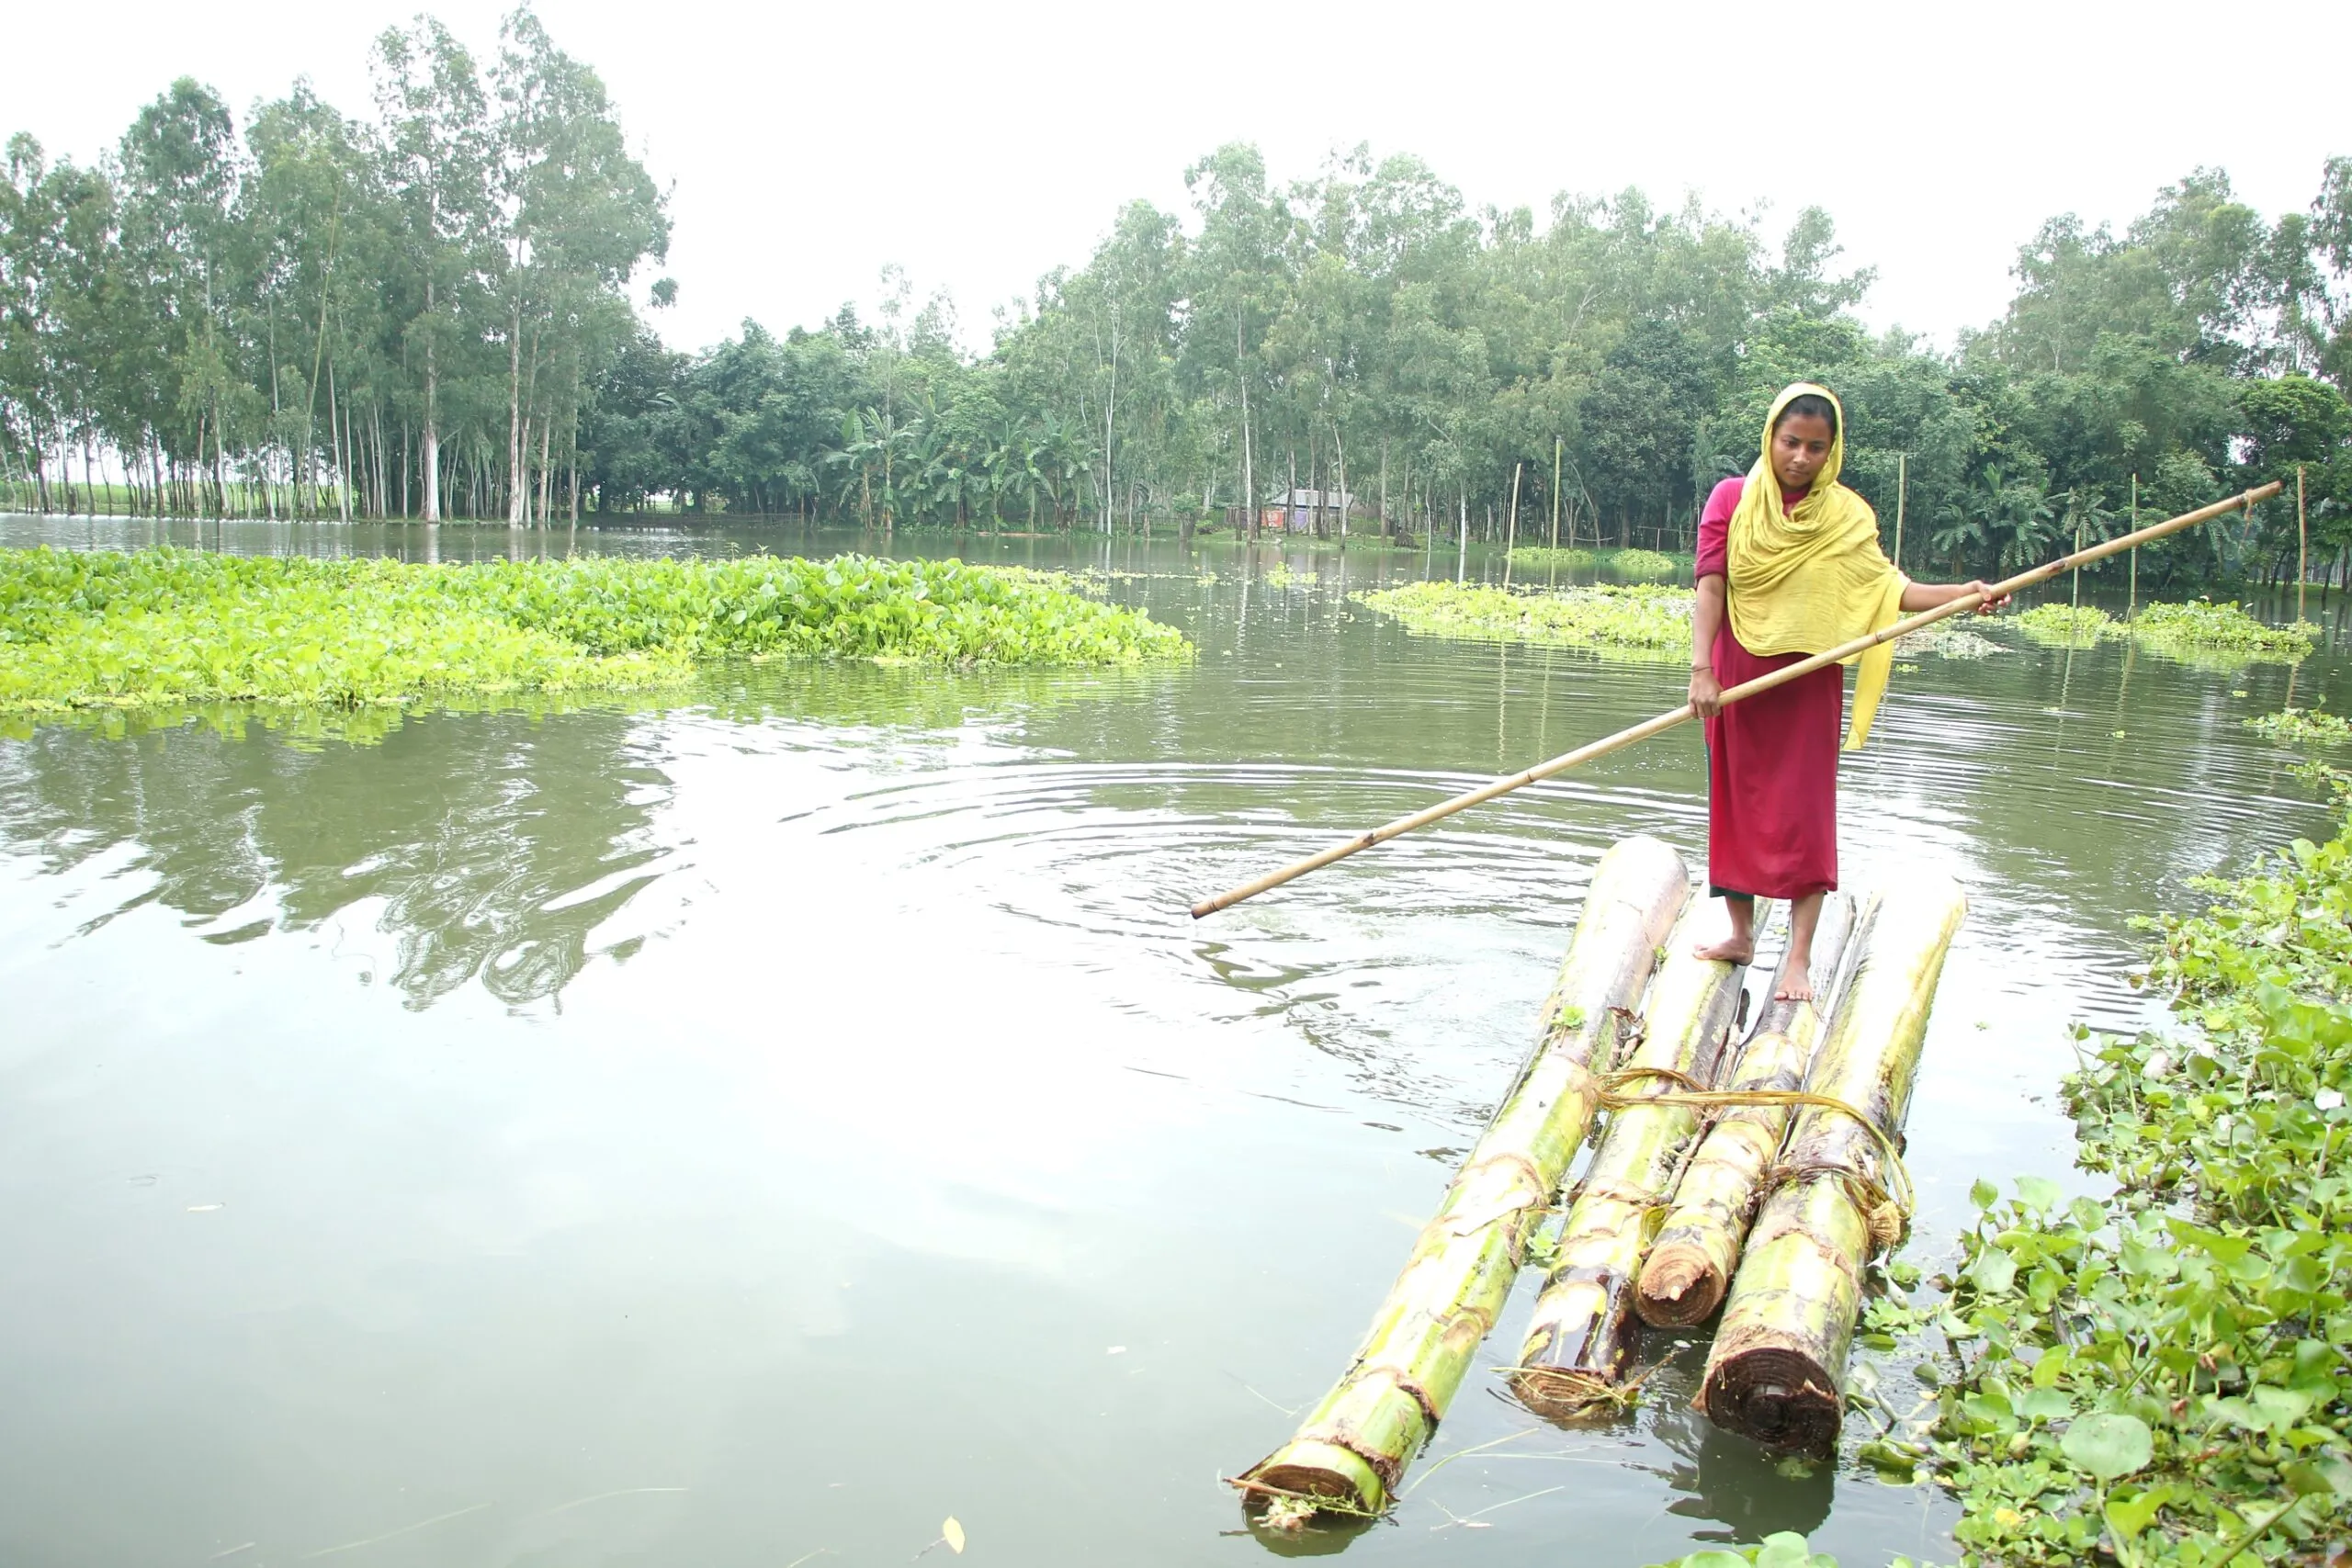 The photograph shows a young woman navigating through a flood-affected area in Bangladesh using a raft made from banana tree trunks.